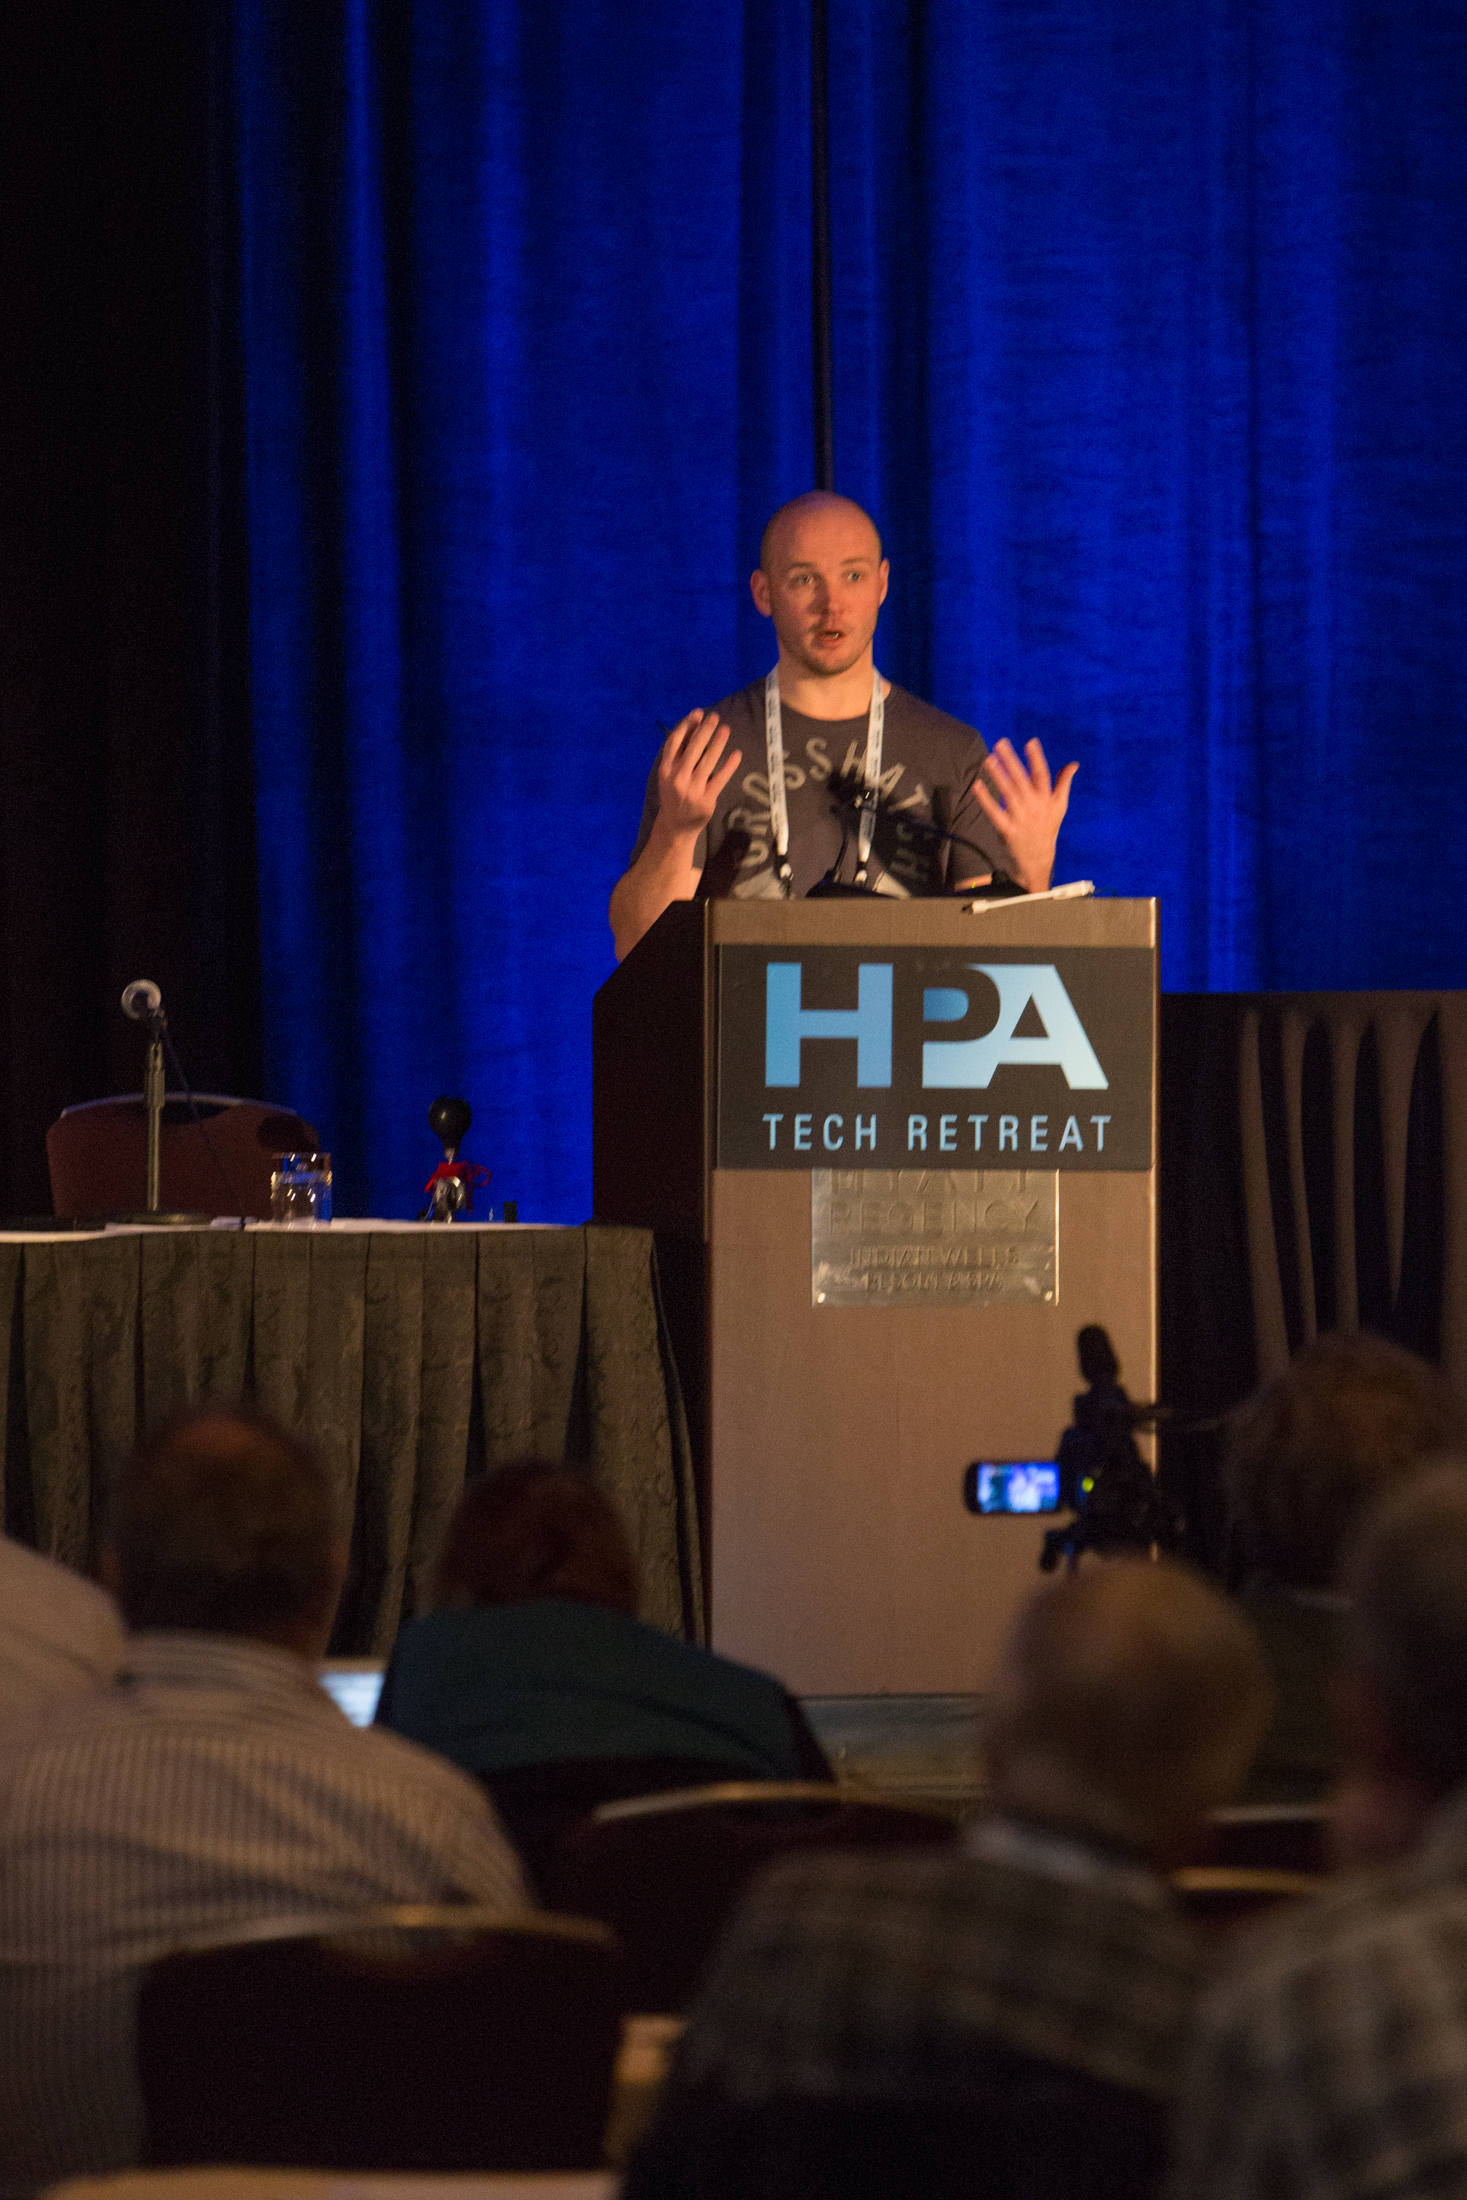 Richard Welsh at the 2016 HPA Tech Retreat in Palm Springs, CA